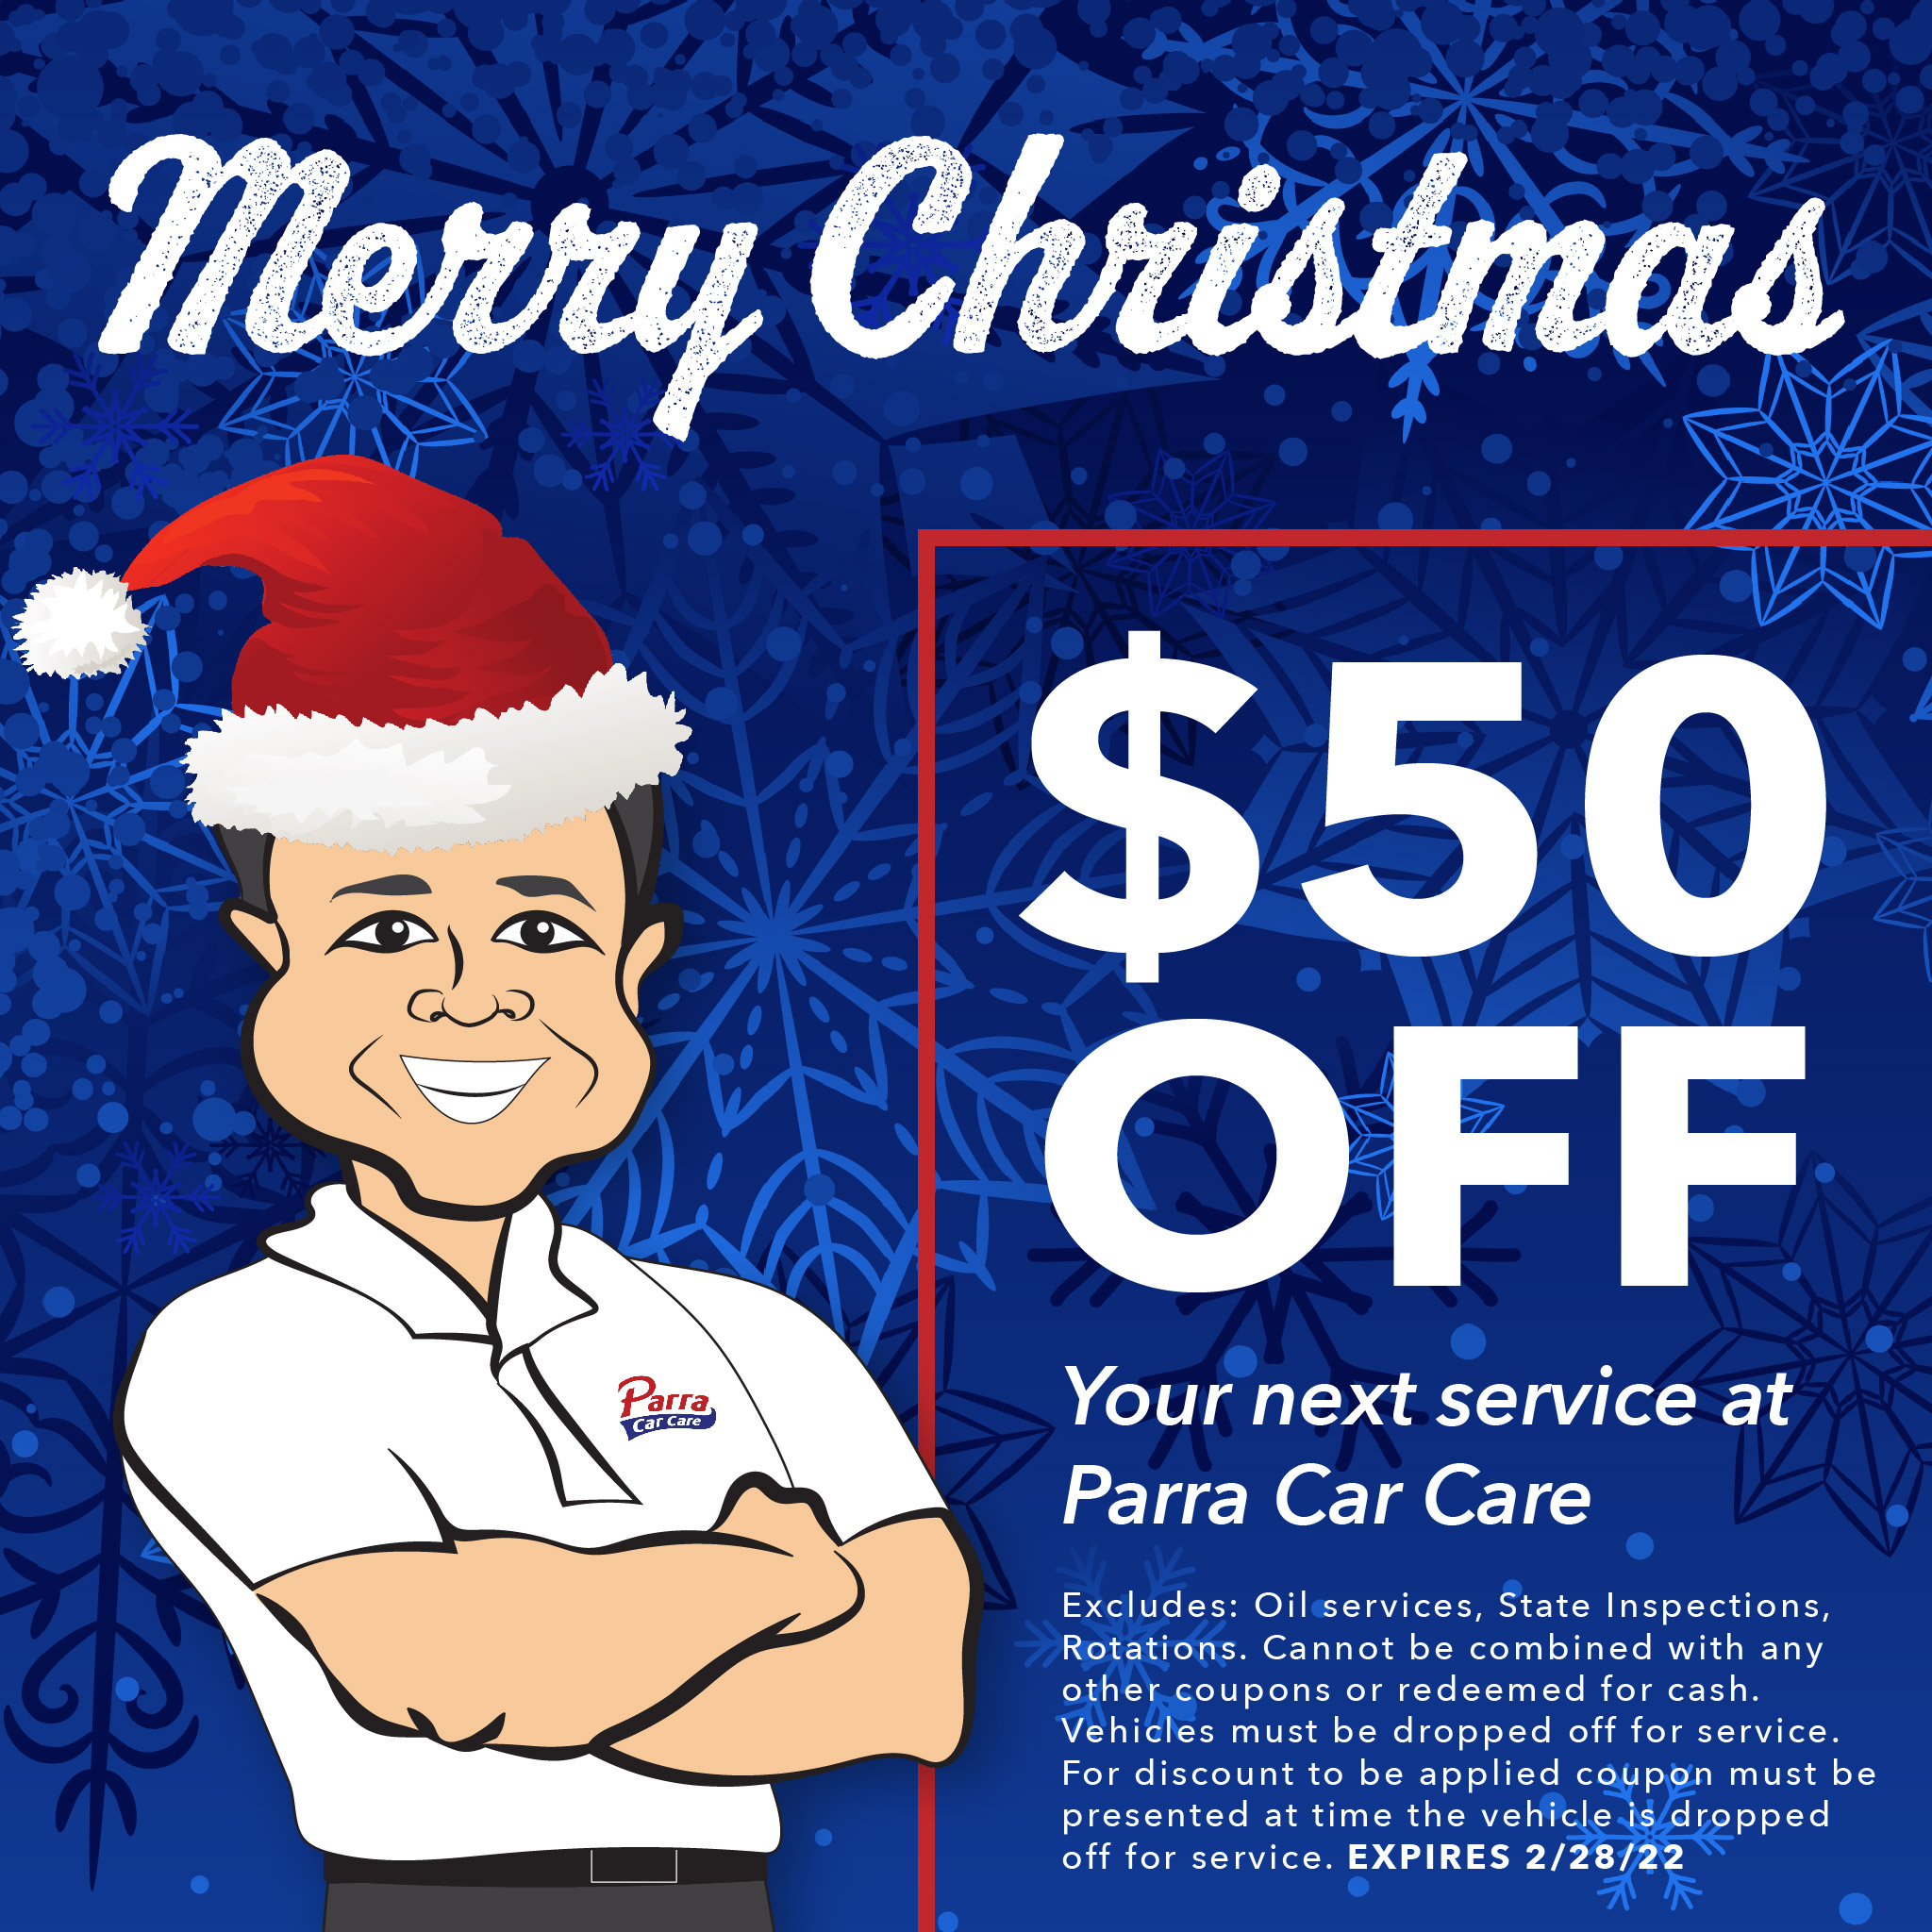 Buy one oil change, get the second one free! Only at Parra Car Care